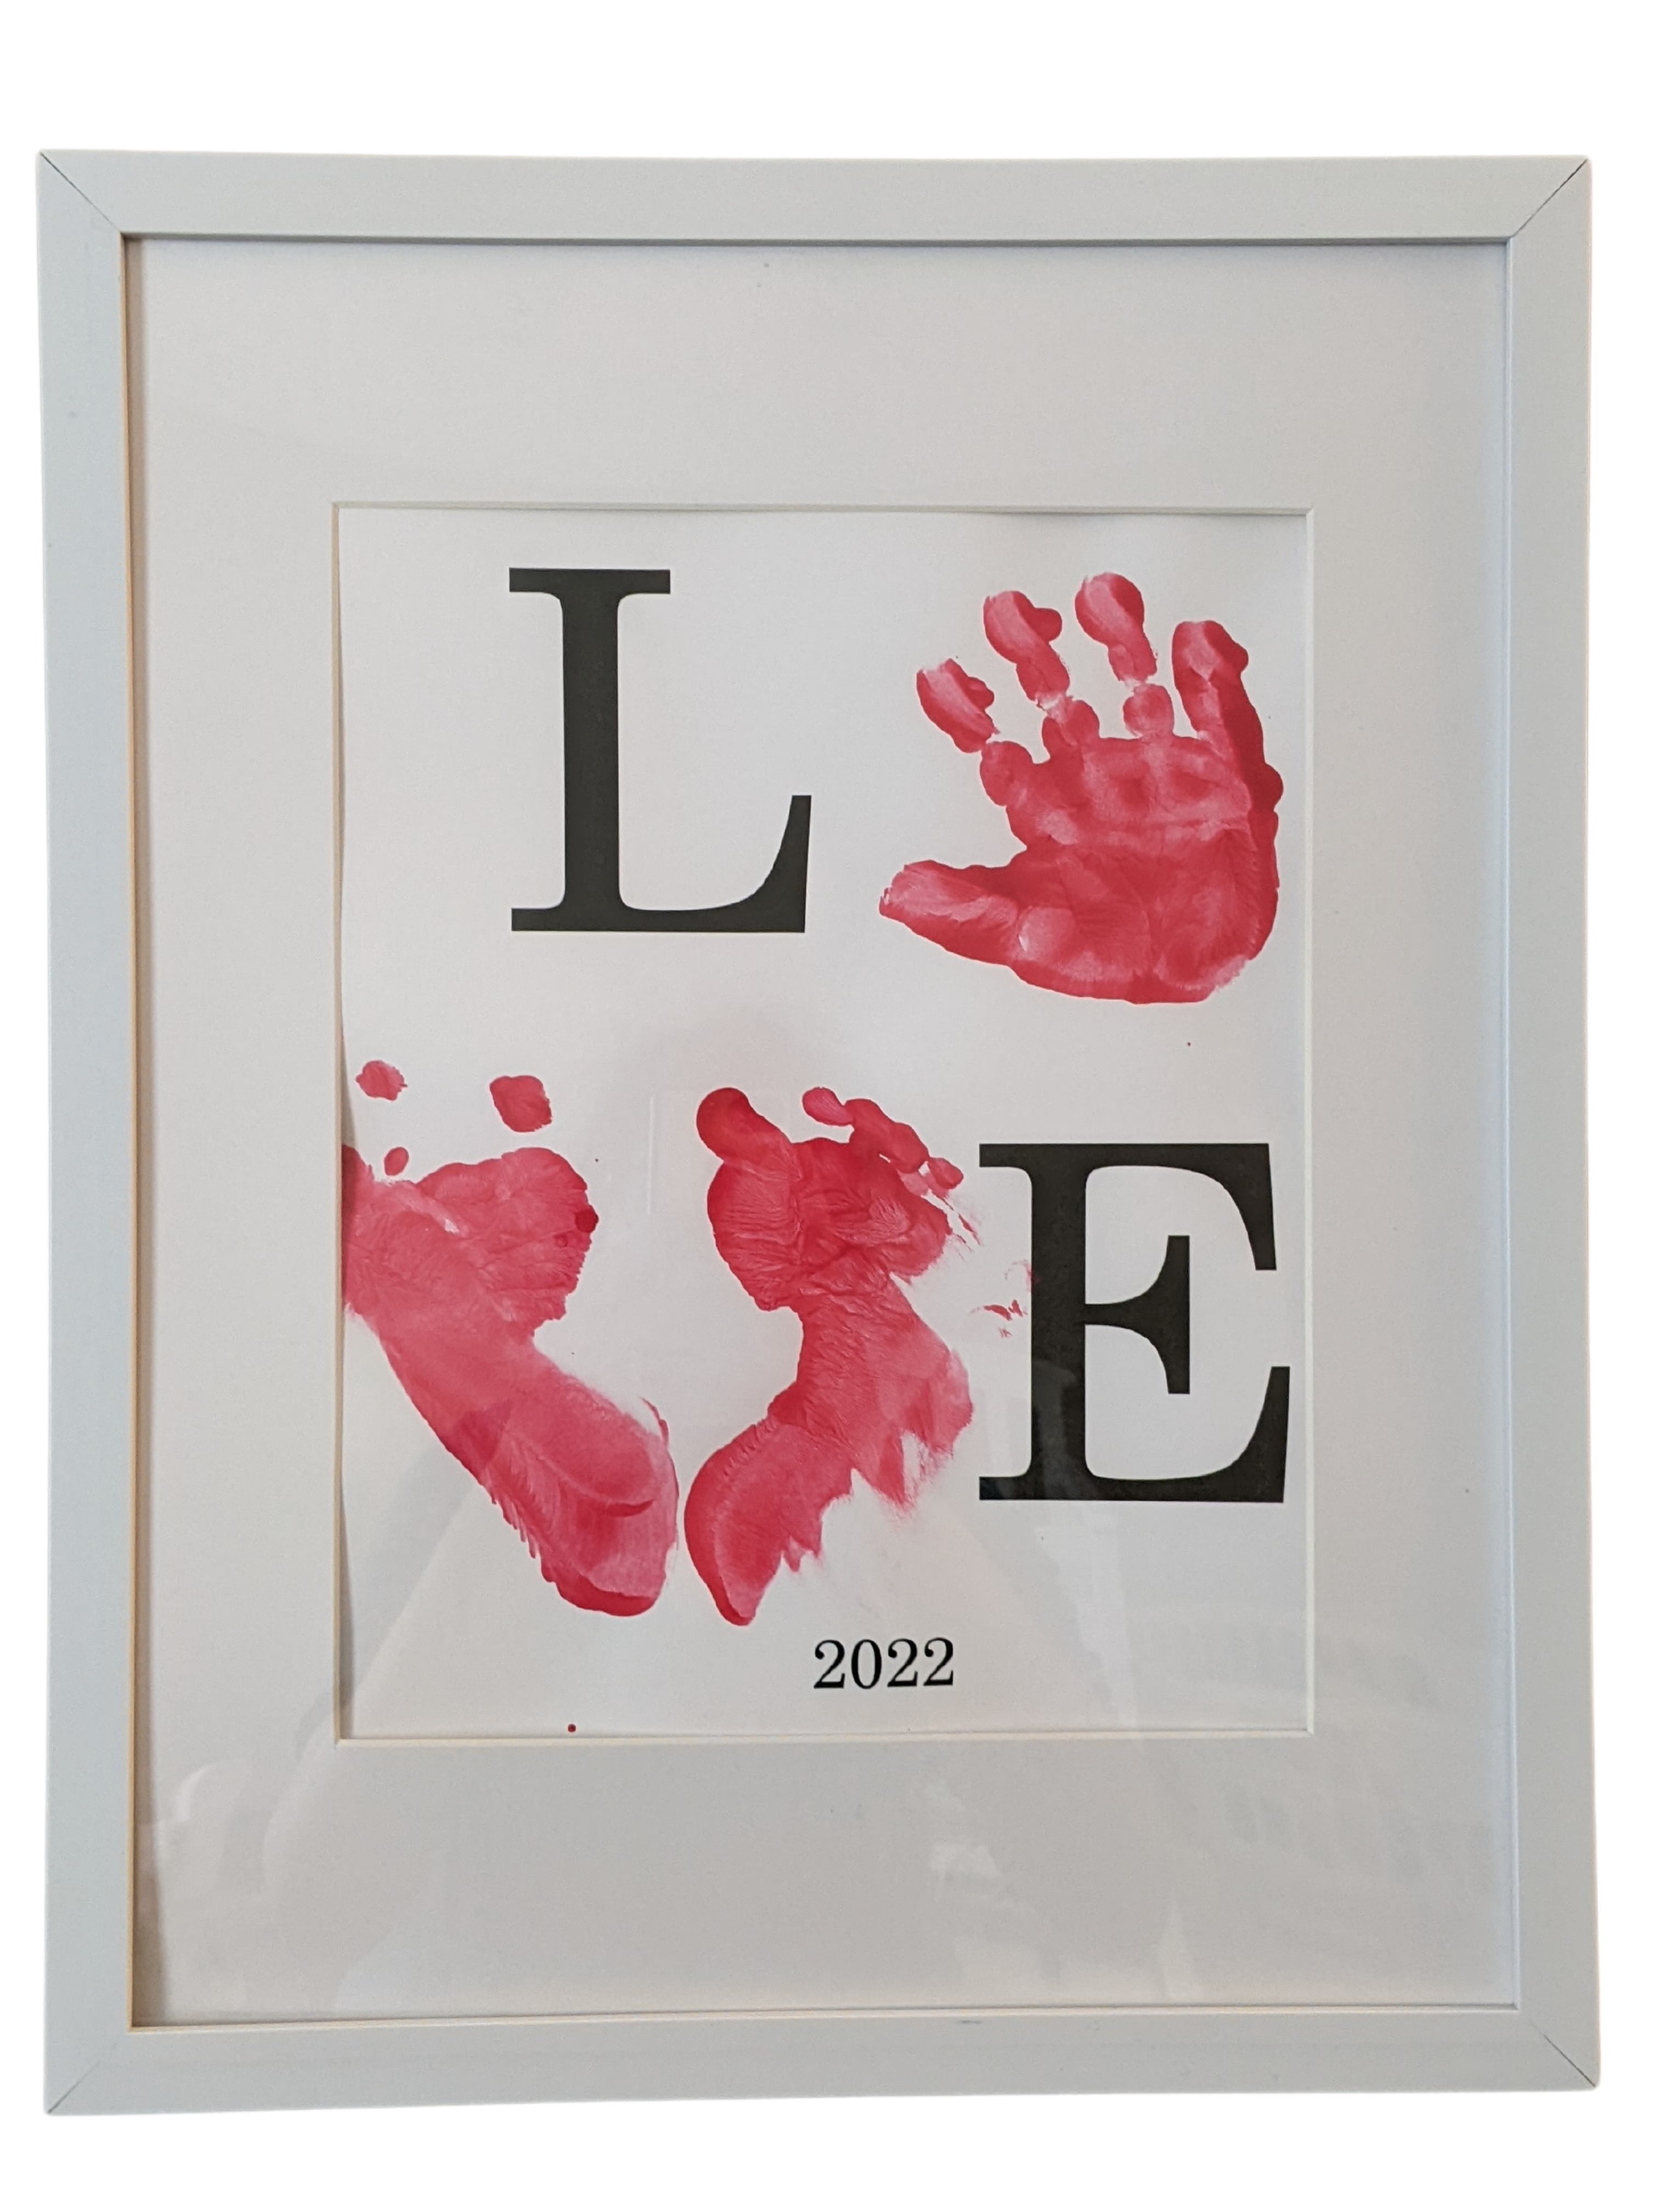 Framed print with L - baby handprint as O - baby footprints as V - E